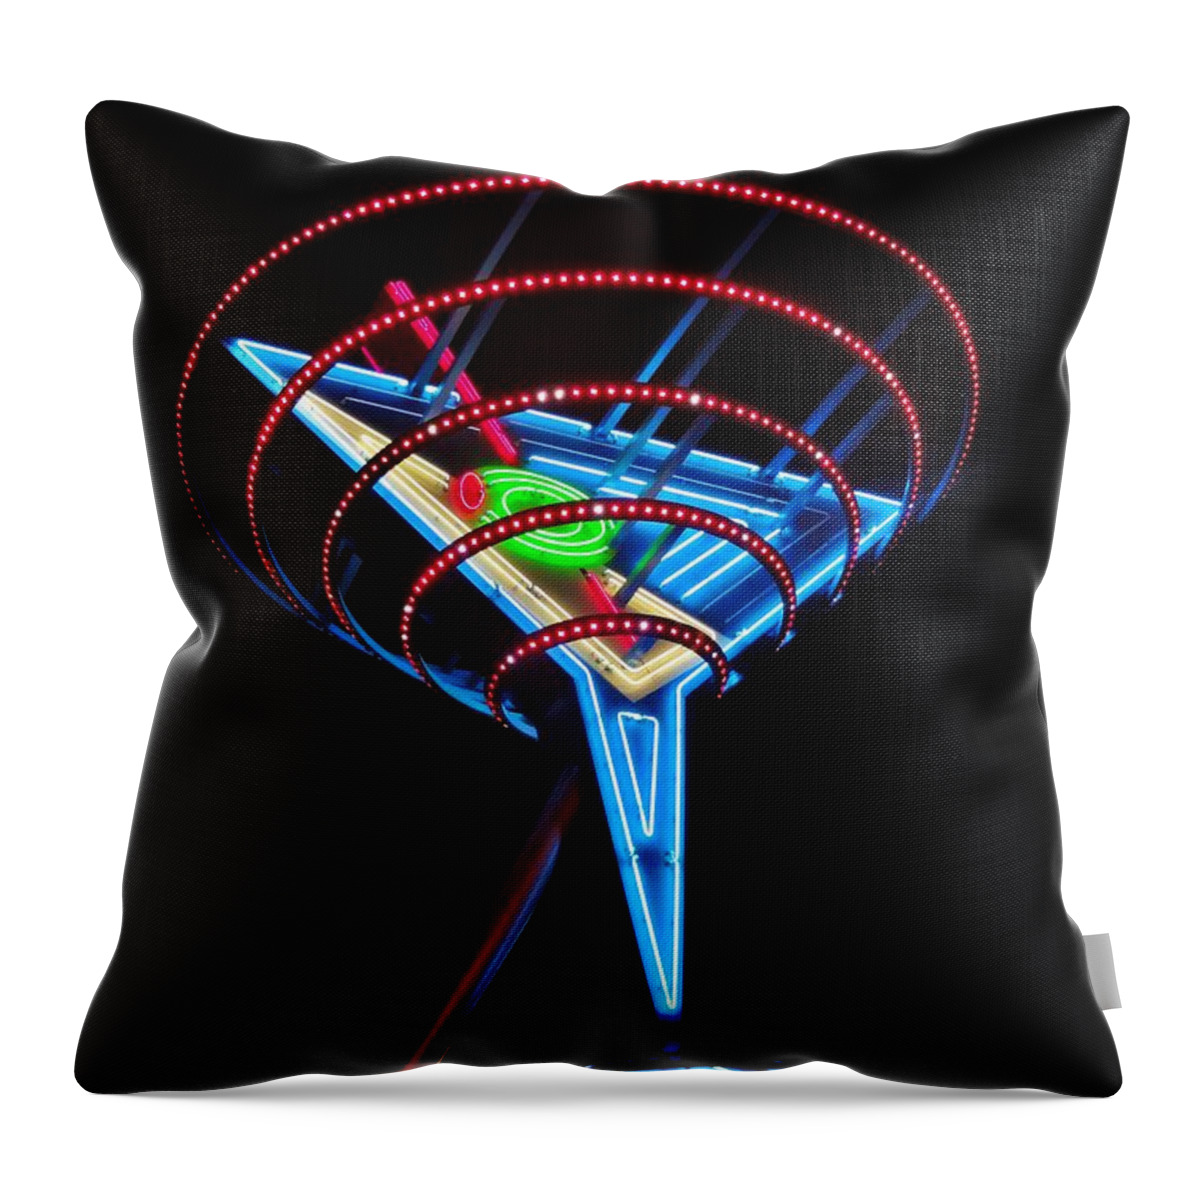 Neon Throw Pillow featuring the photograph Neon Martini by Henry Kowalski